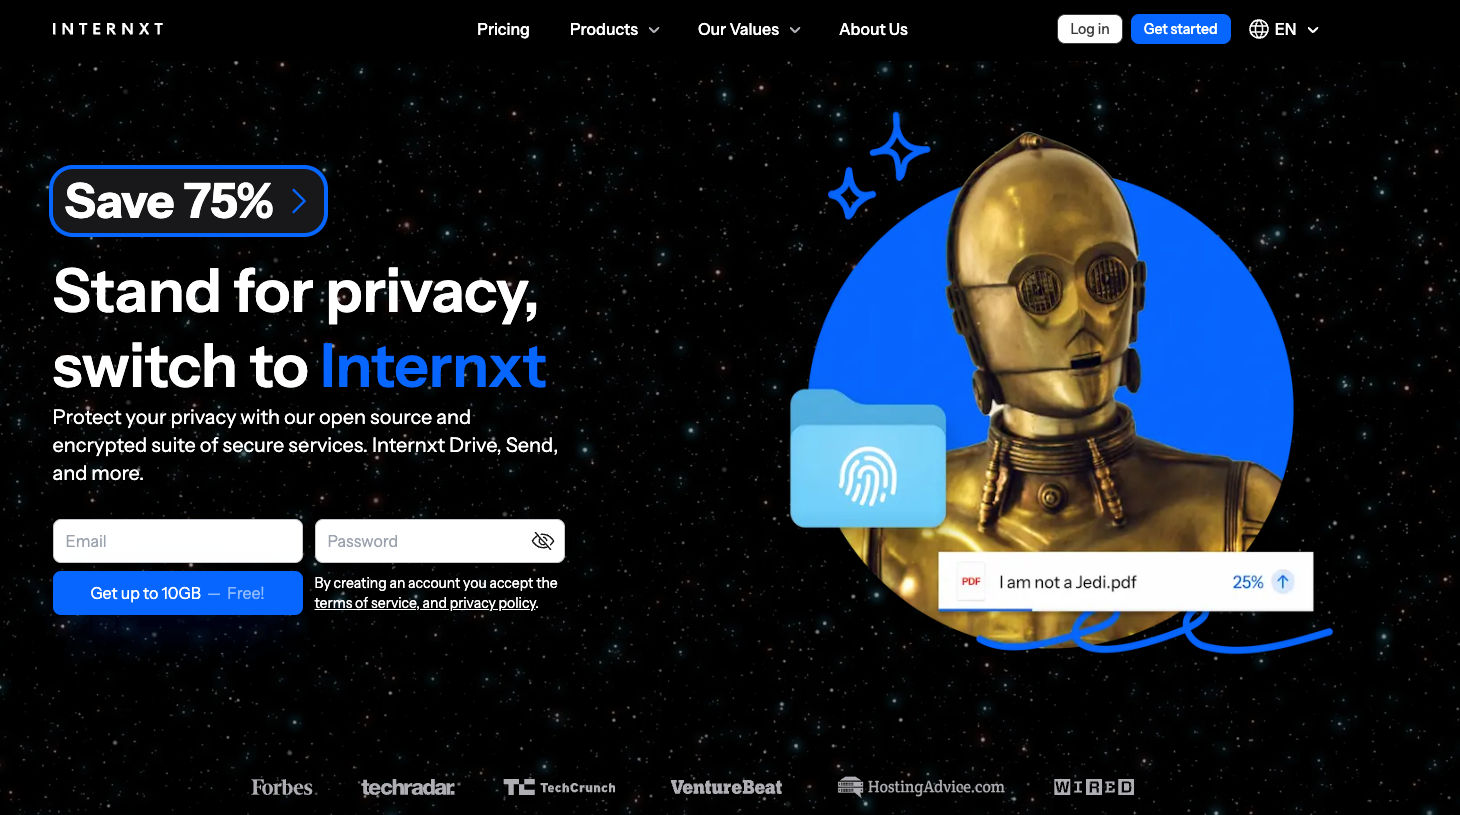 Internxt for business